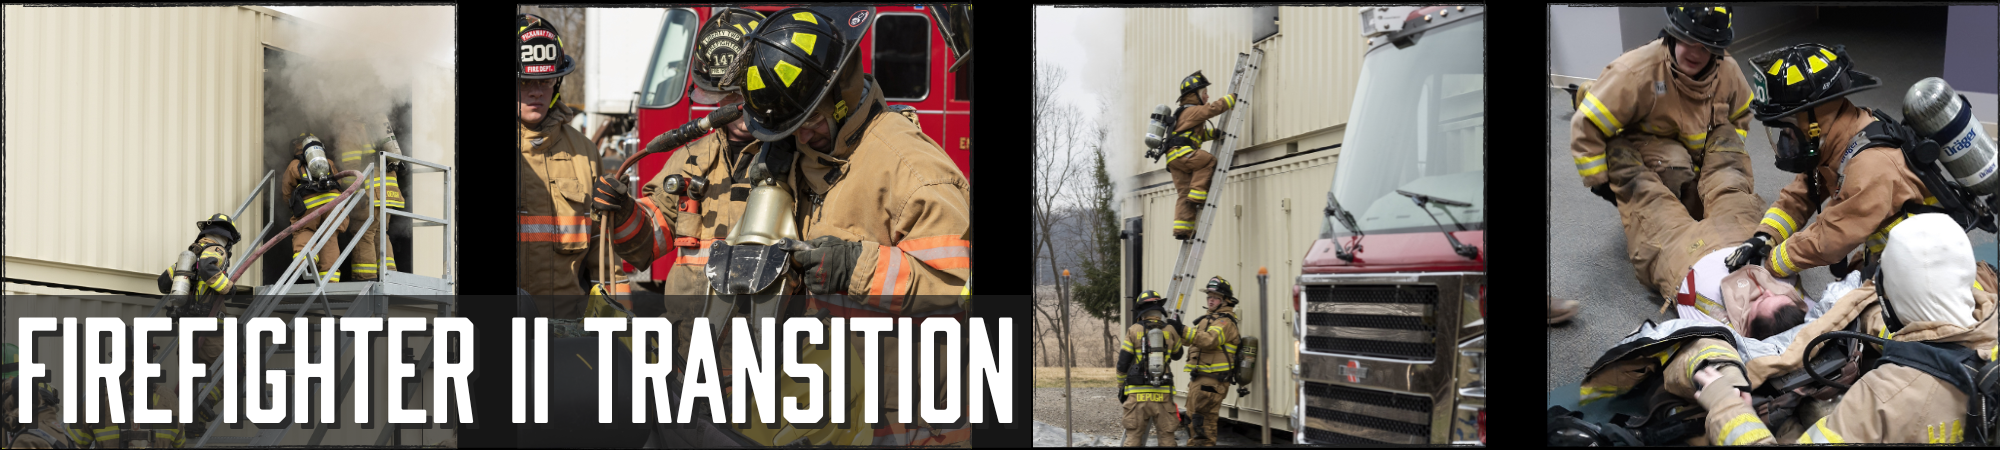 Firefighter II Transition